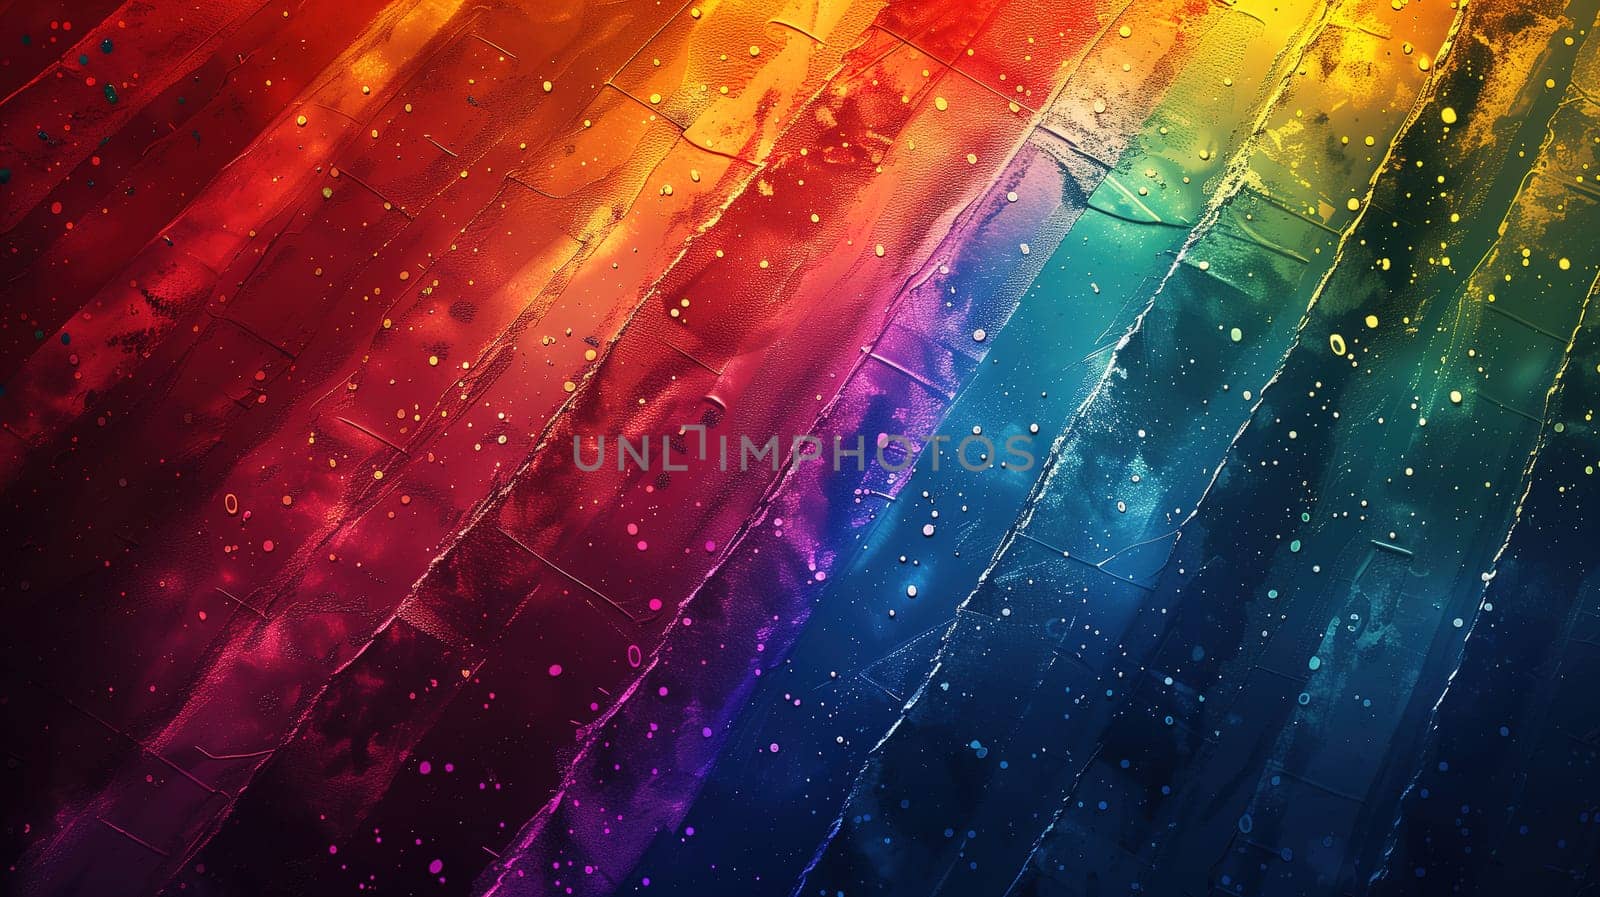 A dynamic display of rainbow hues runs diagonally across a textured surface, symbolizing LGBT pride through its vivid, saturated spectrum. Water droplets add a reflective quality, creating a sense of movement and energy as light shines through, casting a prism of colors representing diversity and inclusivity.